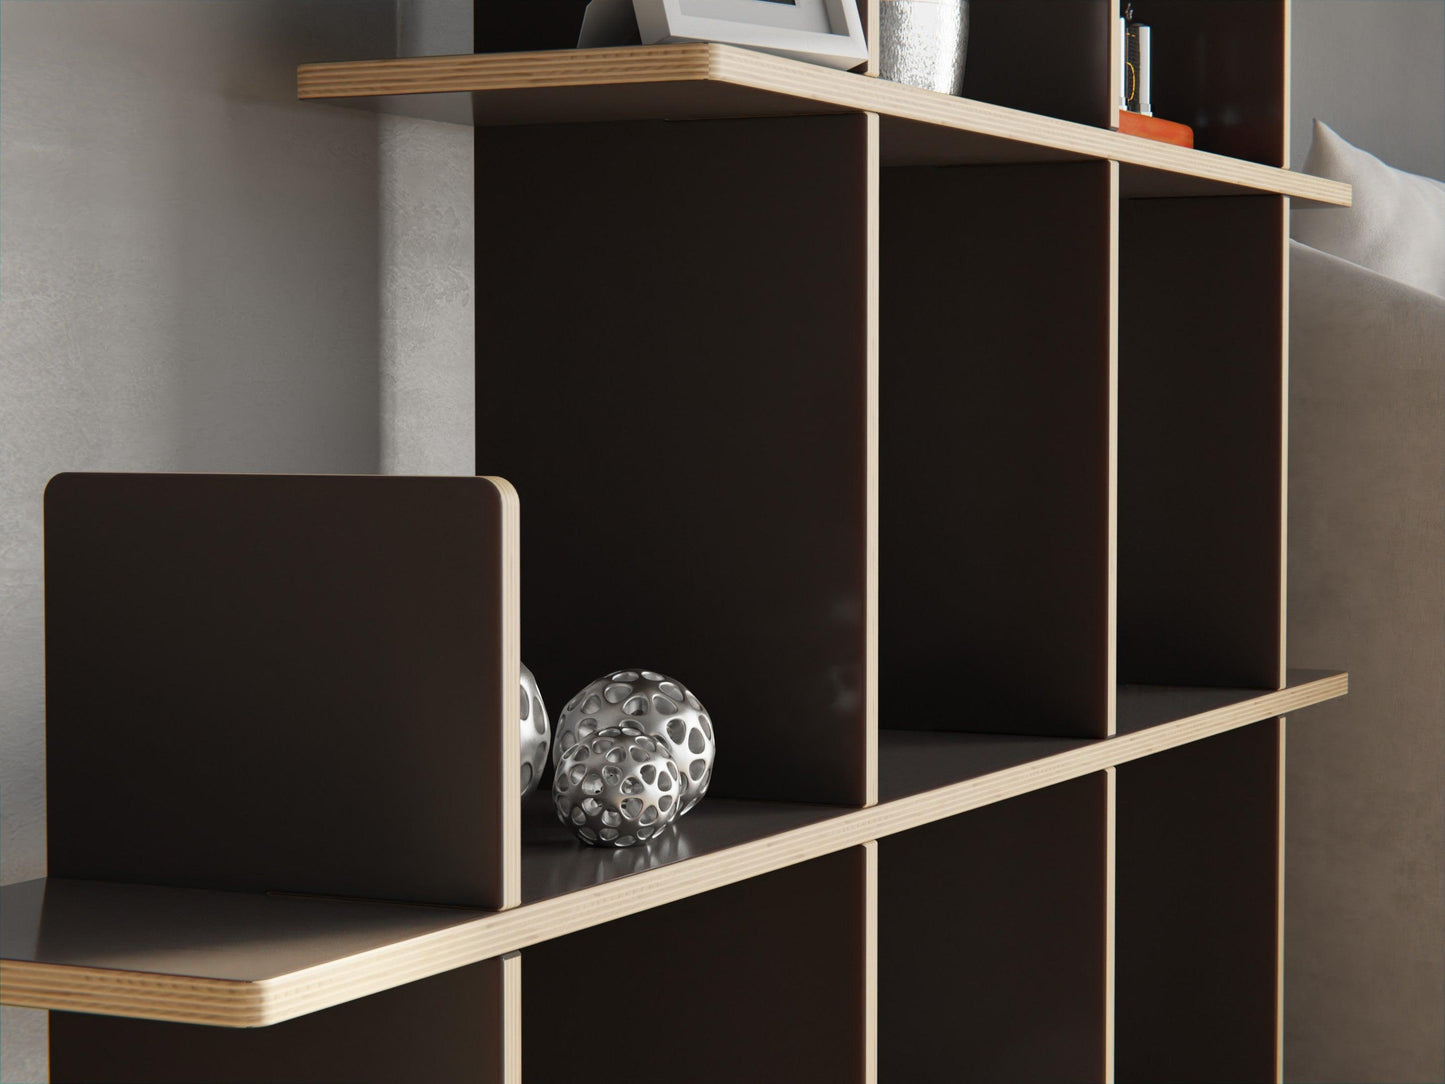 Revamp your decor with our modular bookcase. Ideal for efficient organization within our black Modular Shelf Storage System.